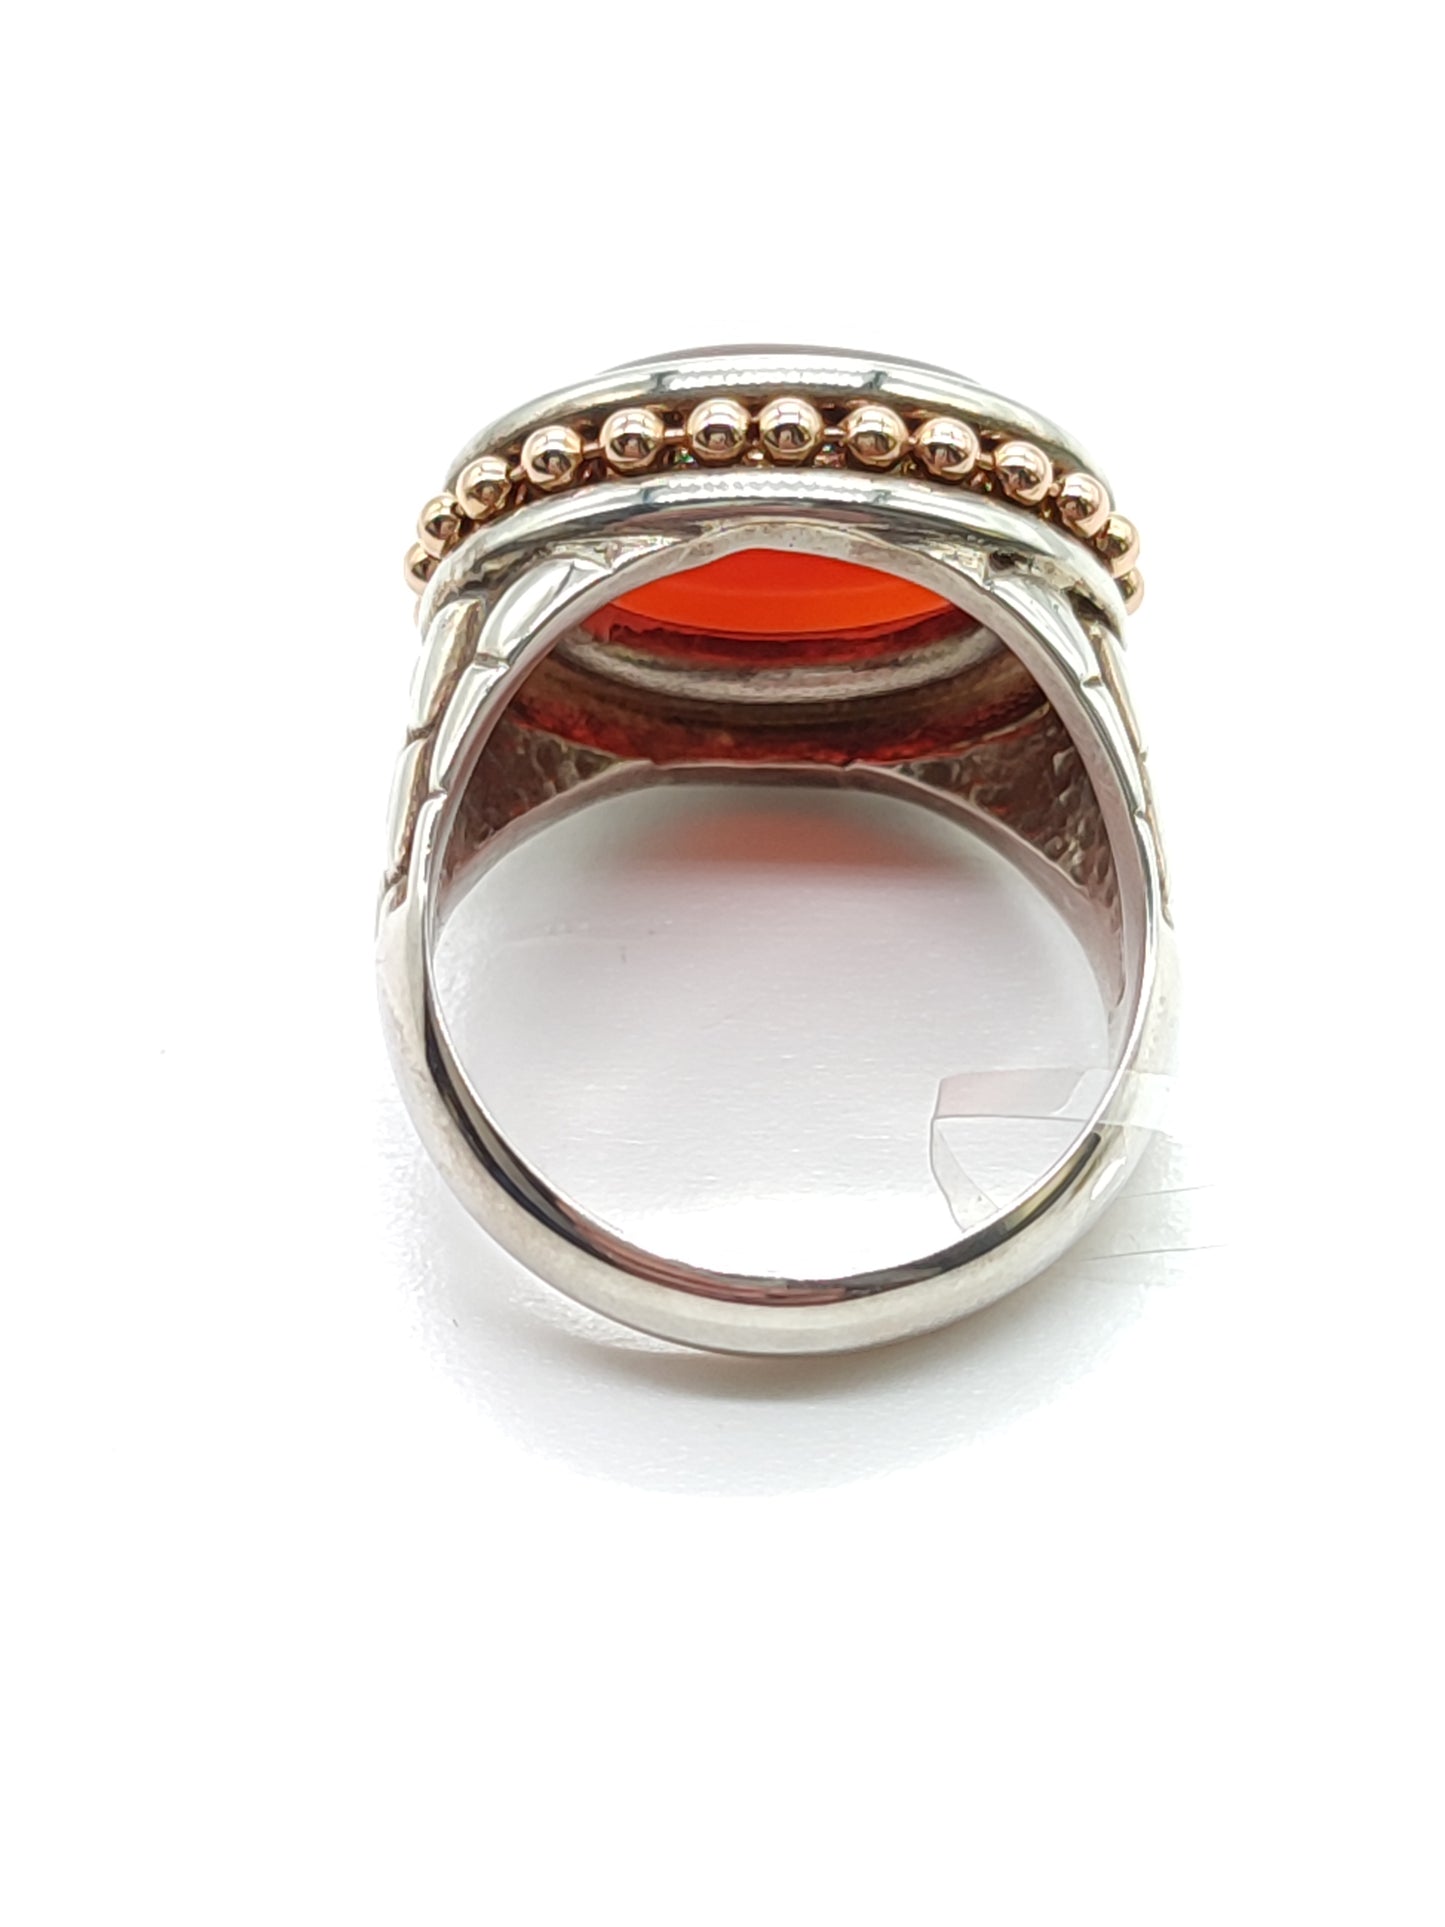 Silver and gold ring with carnelian